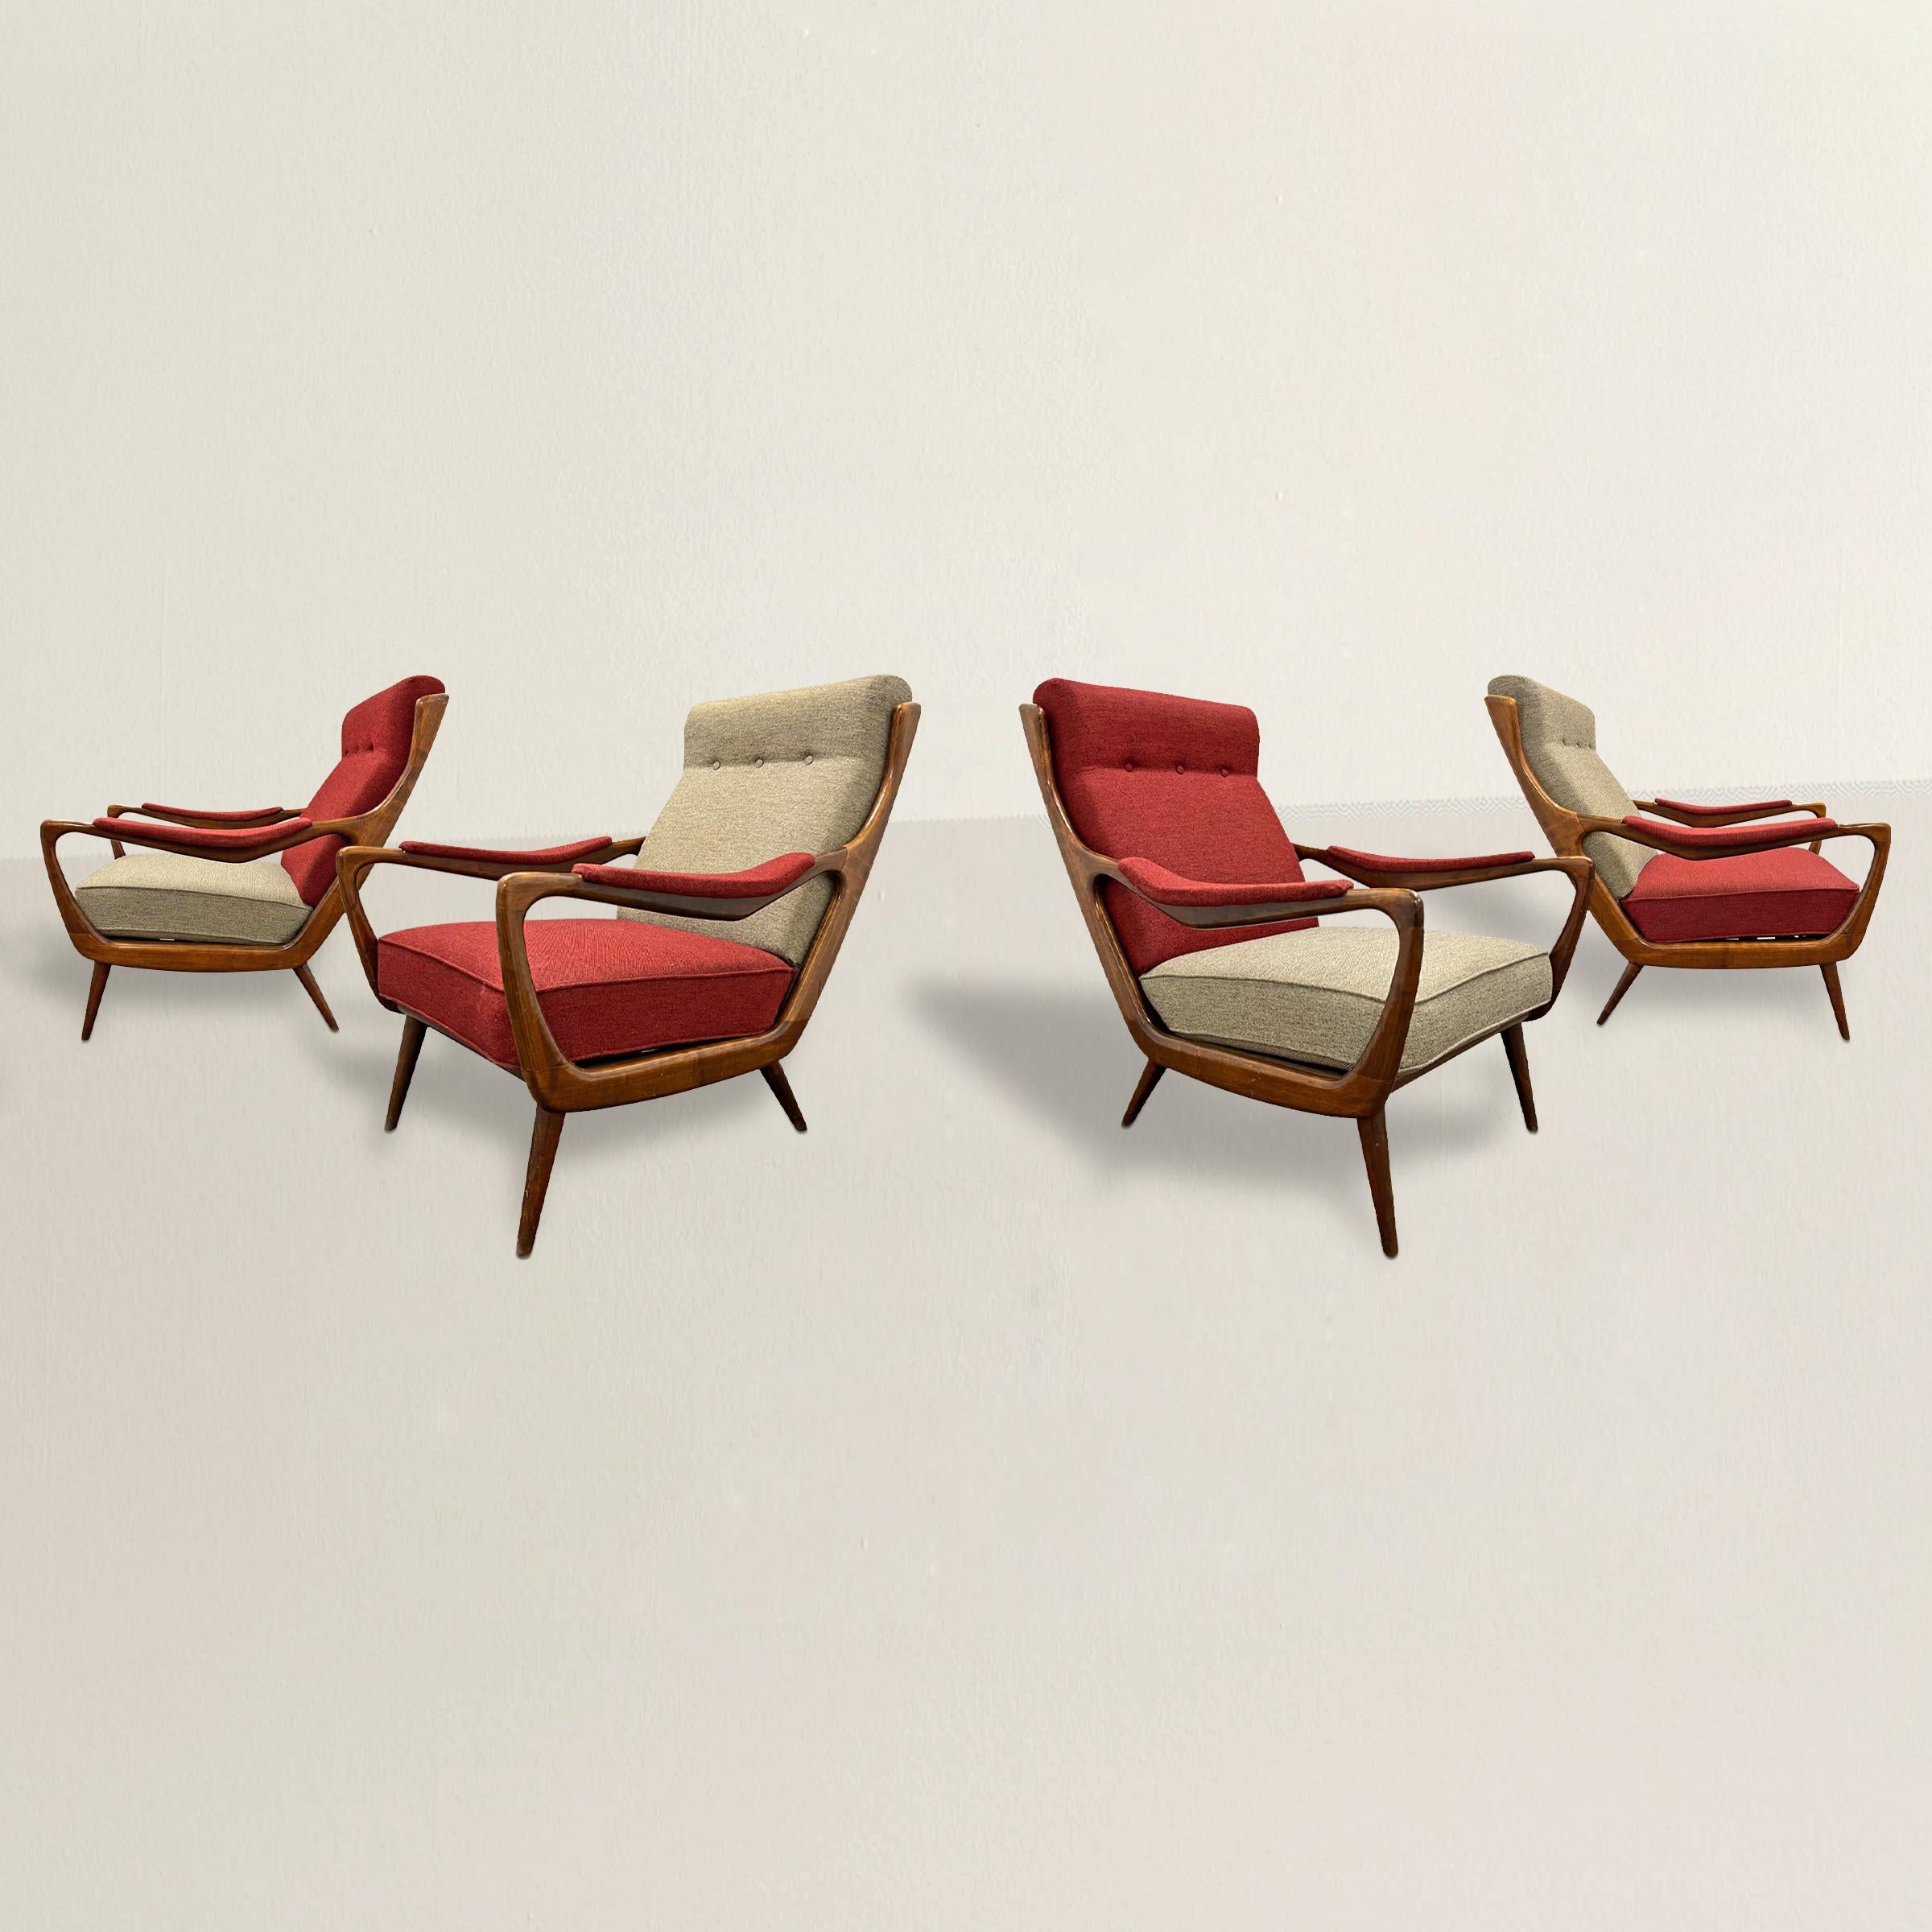 A trendy and tony set of four 1950s Danish Modern lounge chairs with highly stylized wood frames with continuous arms, resting on four tapered turned wood legs, and retaining their original alternating gray and red wool upholstery.  Perfect for your